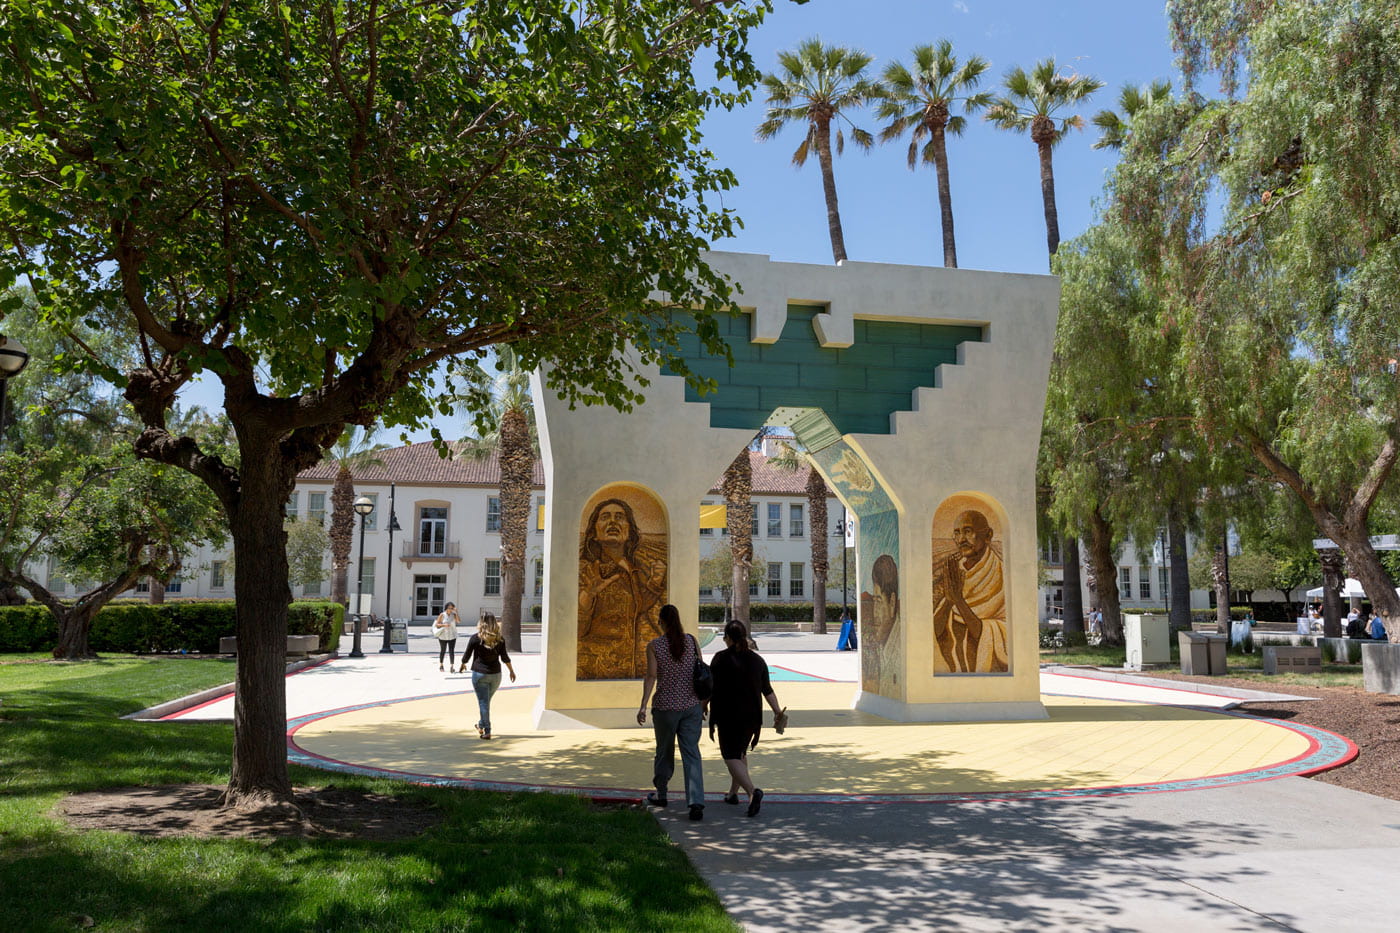 The Cesar E. Chavez Monument: Arch of Dignity, Equality and Justice on the grounds of SJSU.